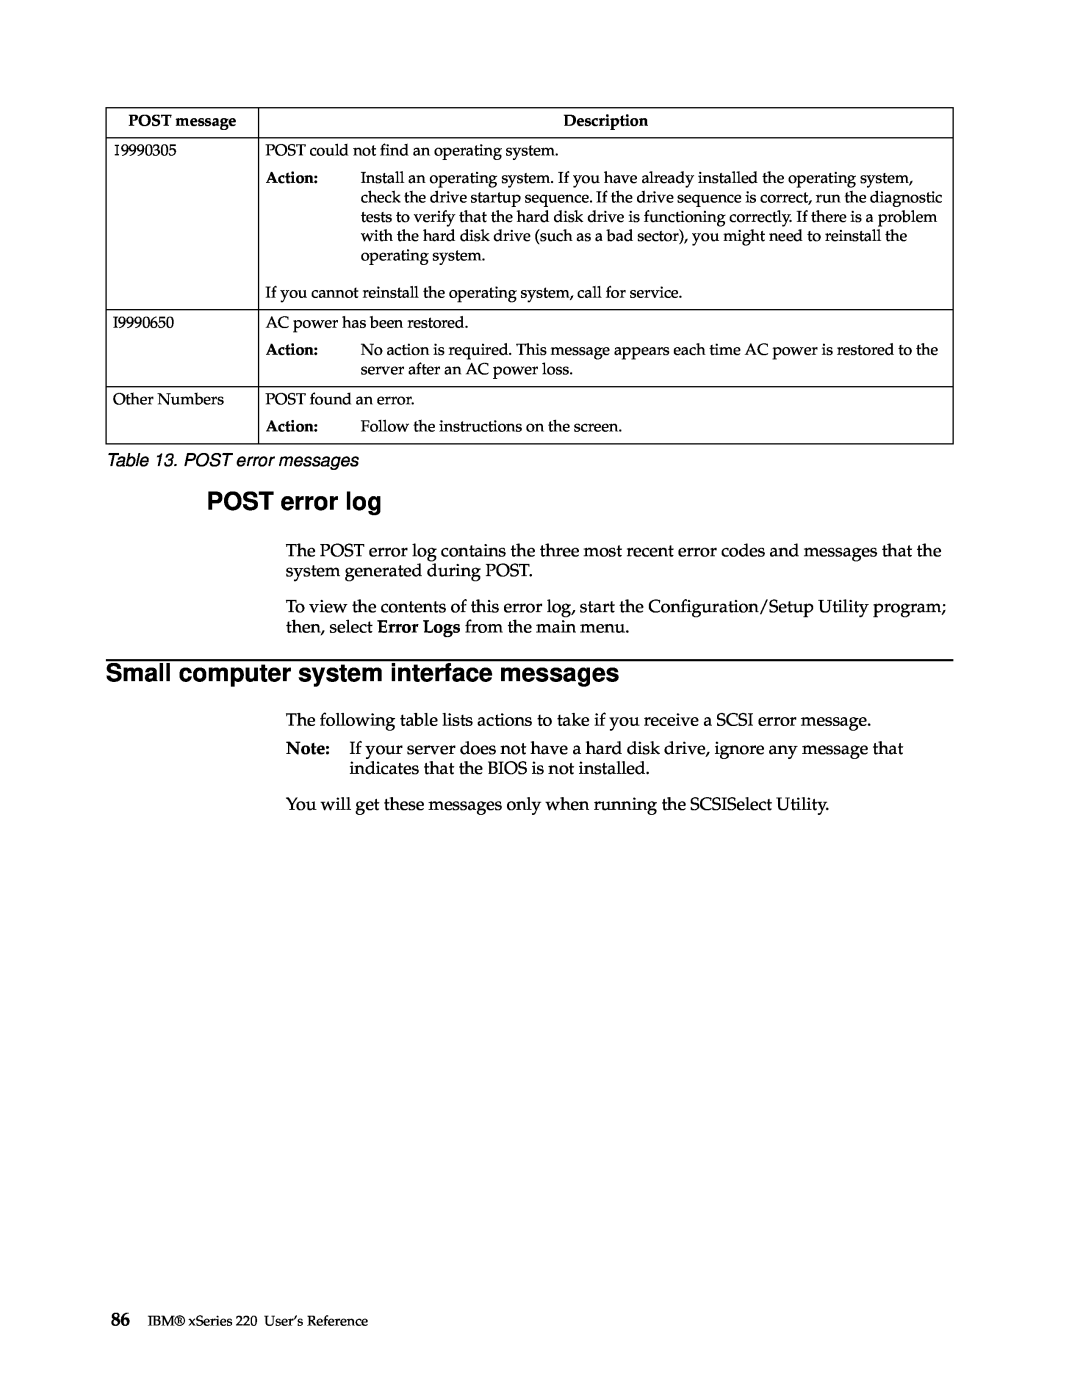 IBM 220 manual POST error log, Small computer system interface messages, POST error messages 